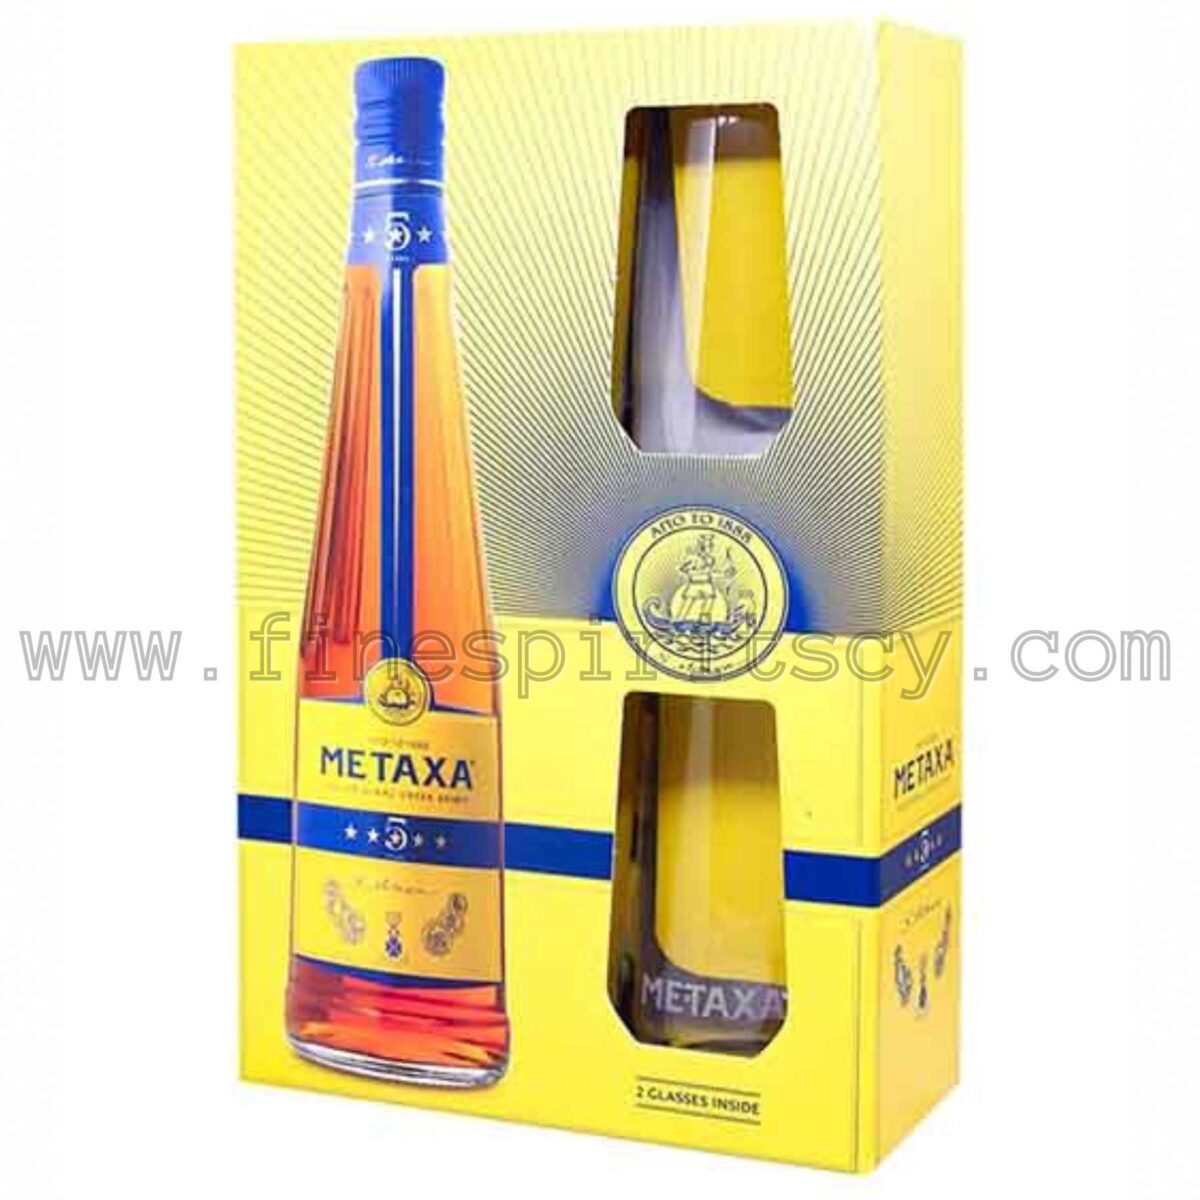 Metaxa 5* Gift Box Idea With Two Glass Price Cyprus Order Online Fine Spirits CY